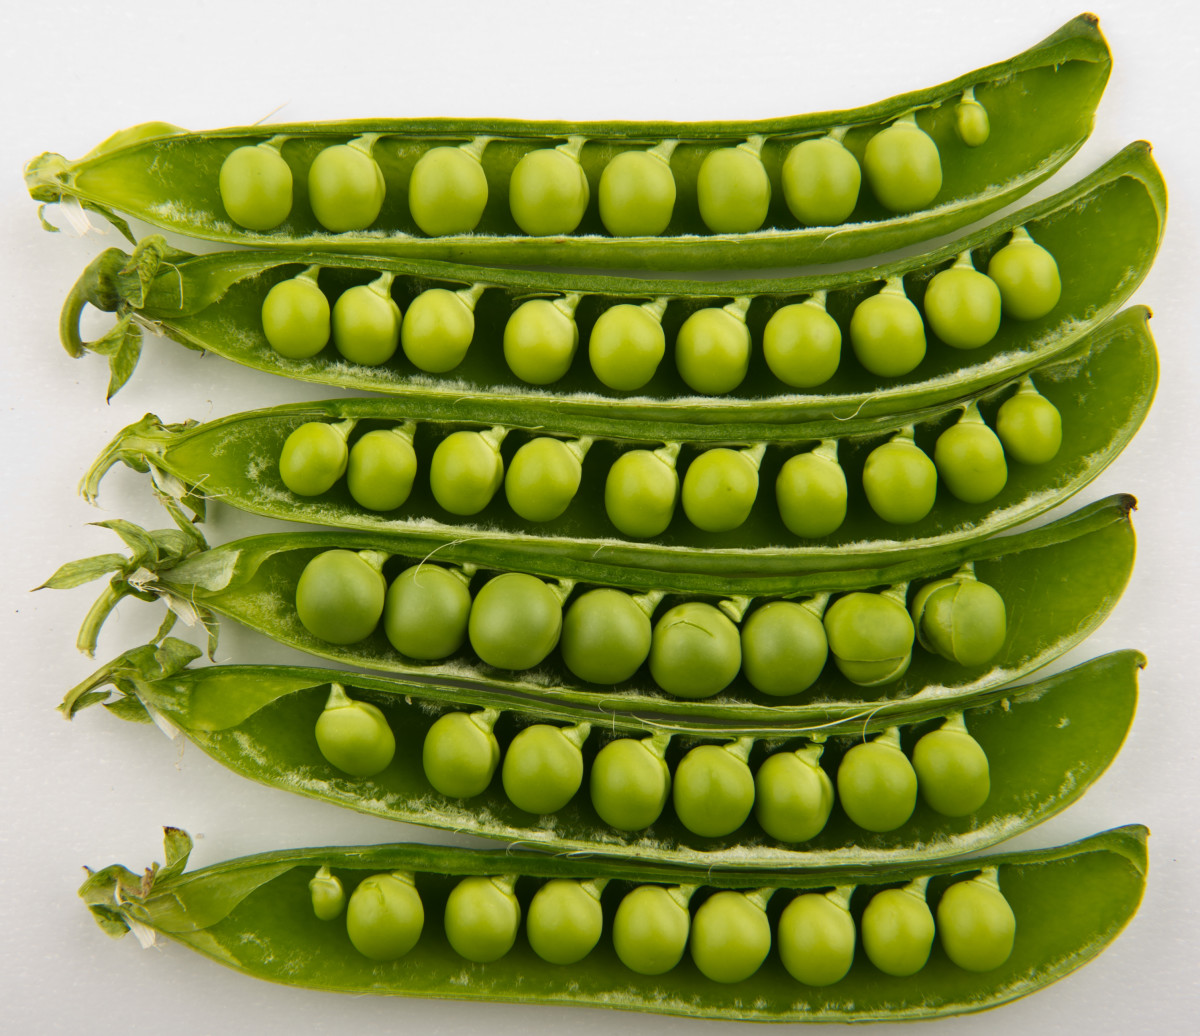 I still prefer the taste of homegrown peas to this day!